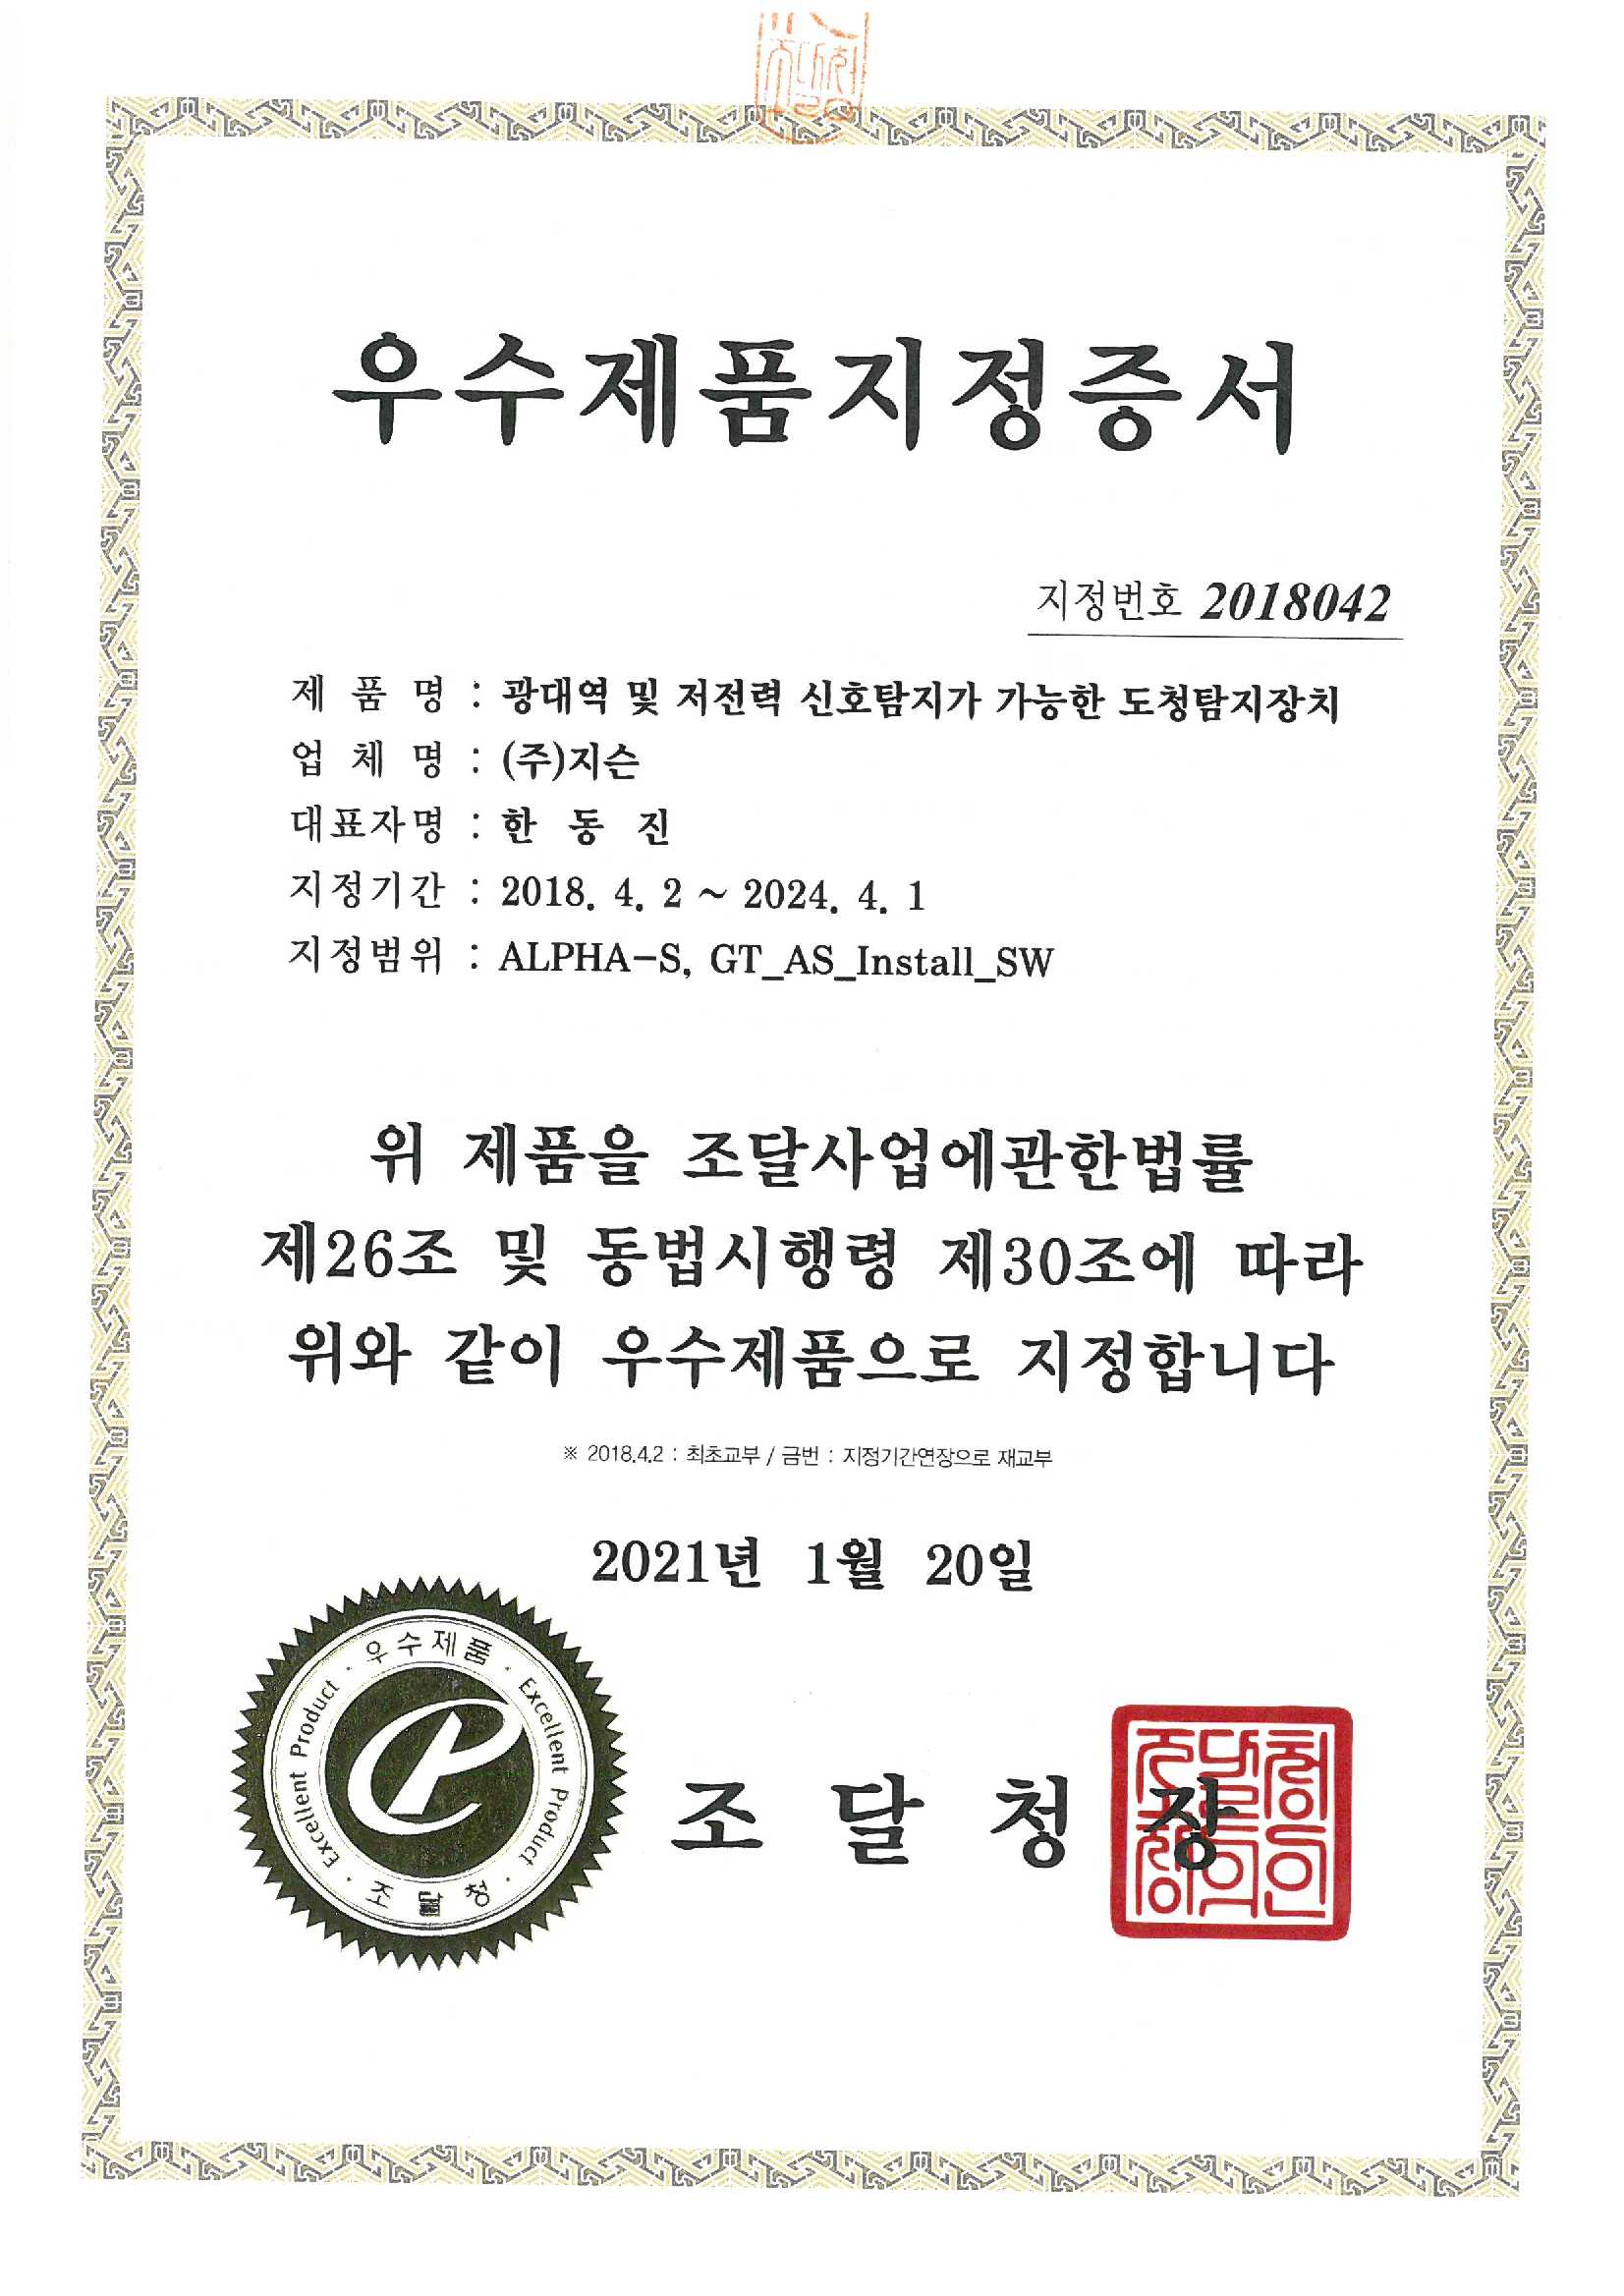 Certificate of Designation of Excellent Product